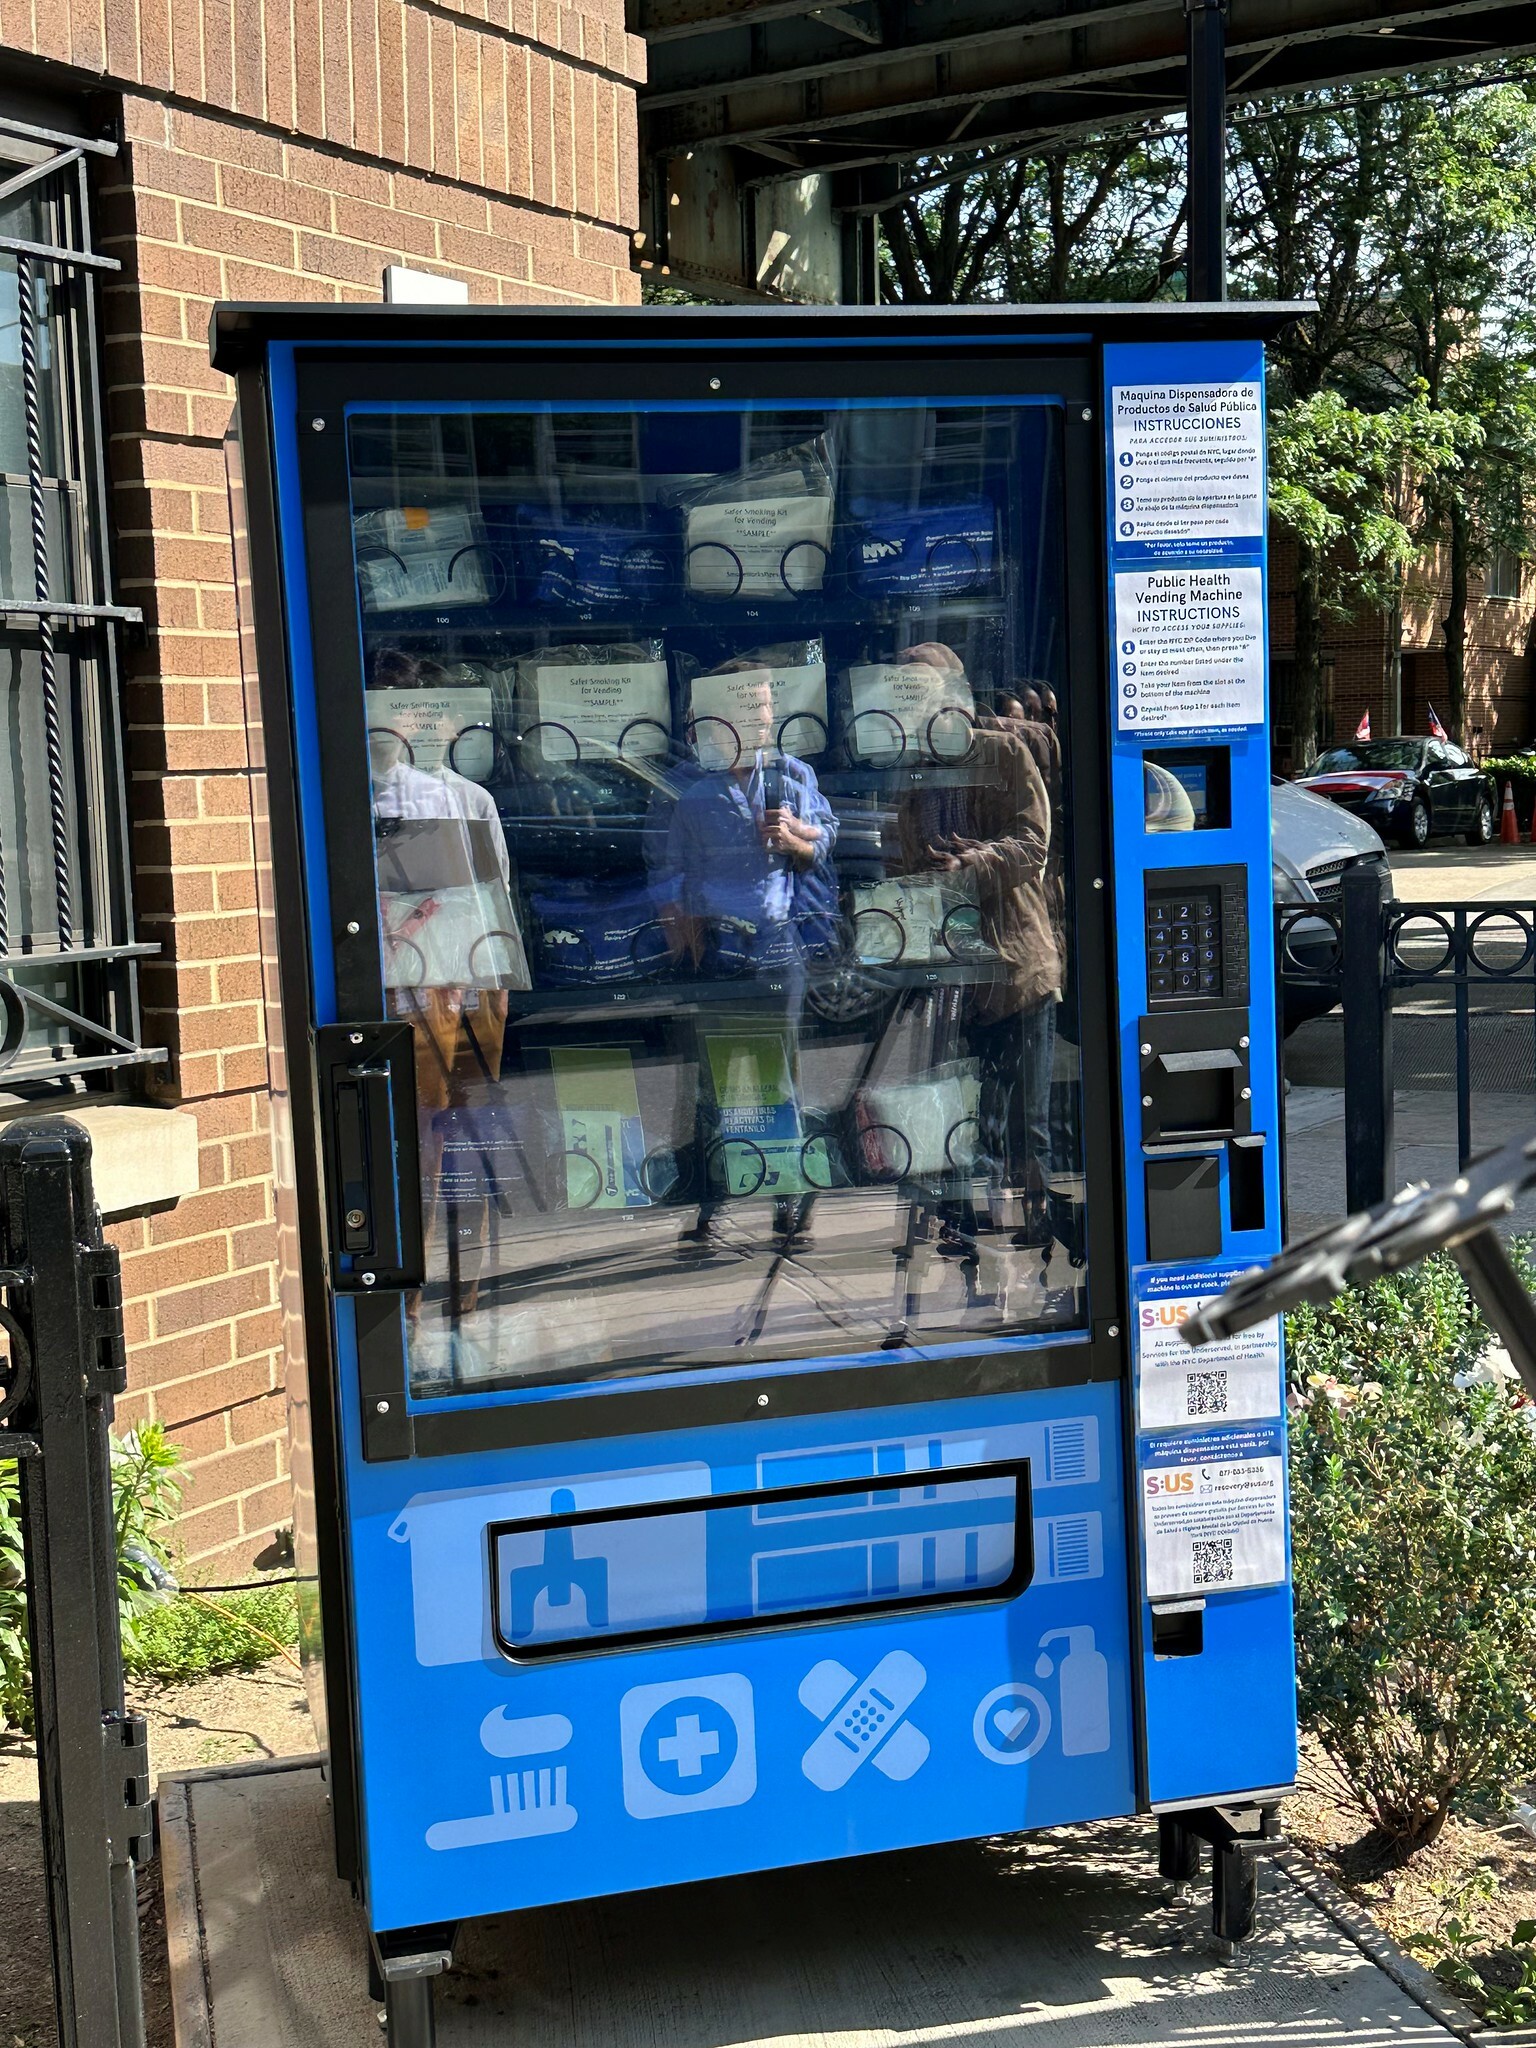 NYC’s first public health vending machine. It’s blue and is standing outside a building.